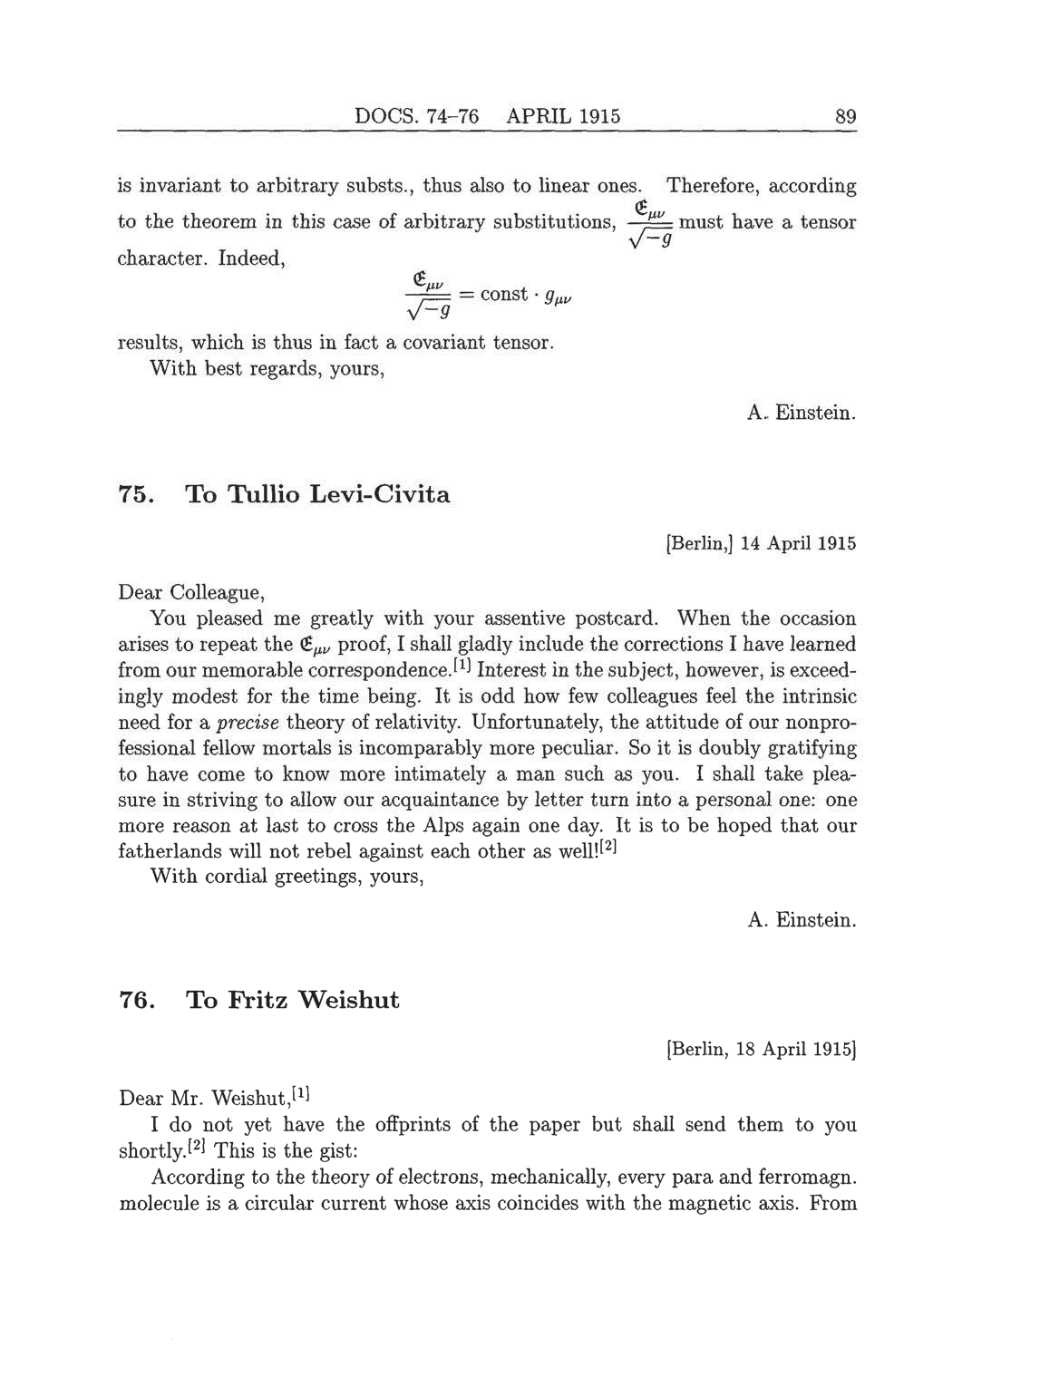 Volume 8: The Berlin Years: Correspondence, 1914-1918 (English translation supplement) page 89